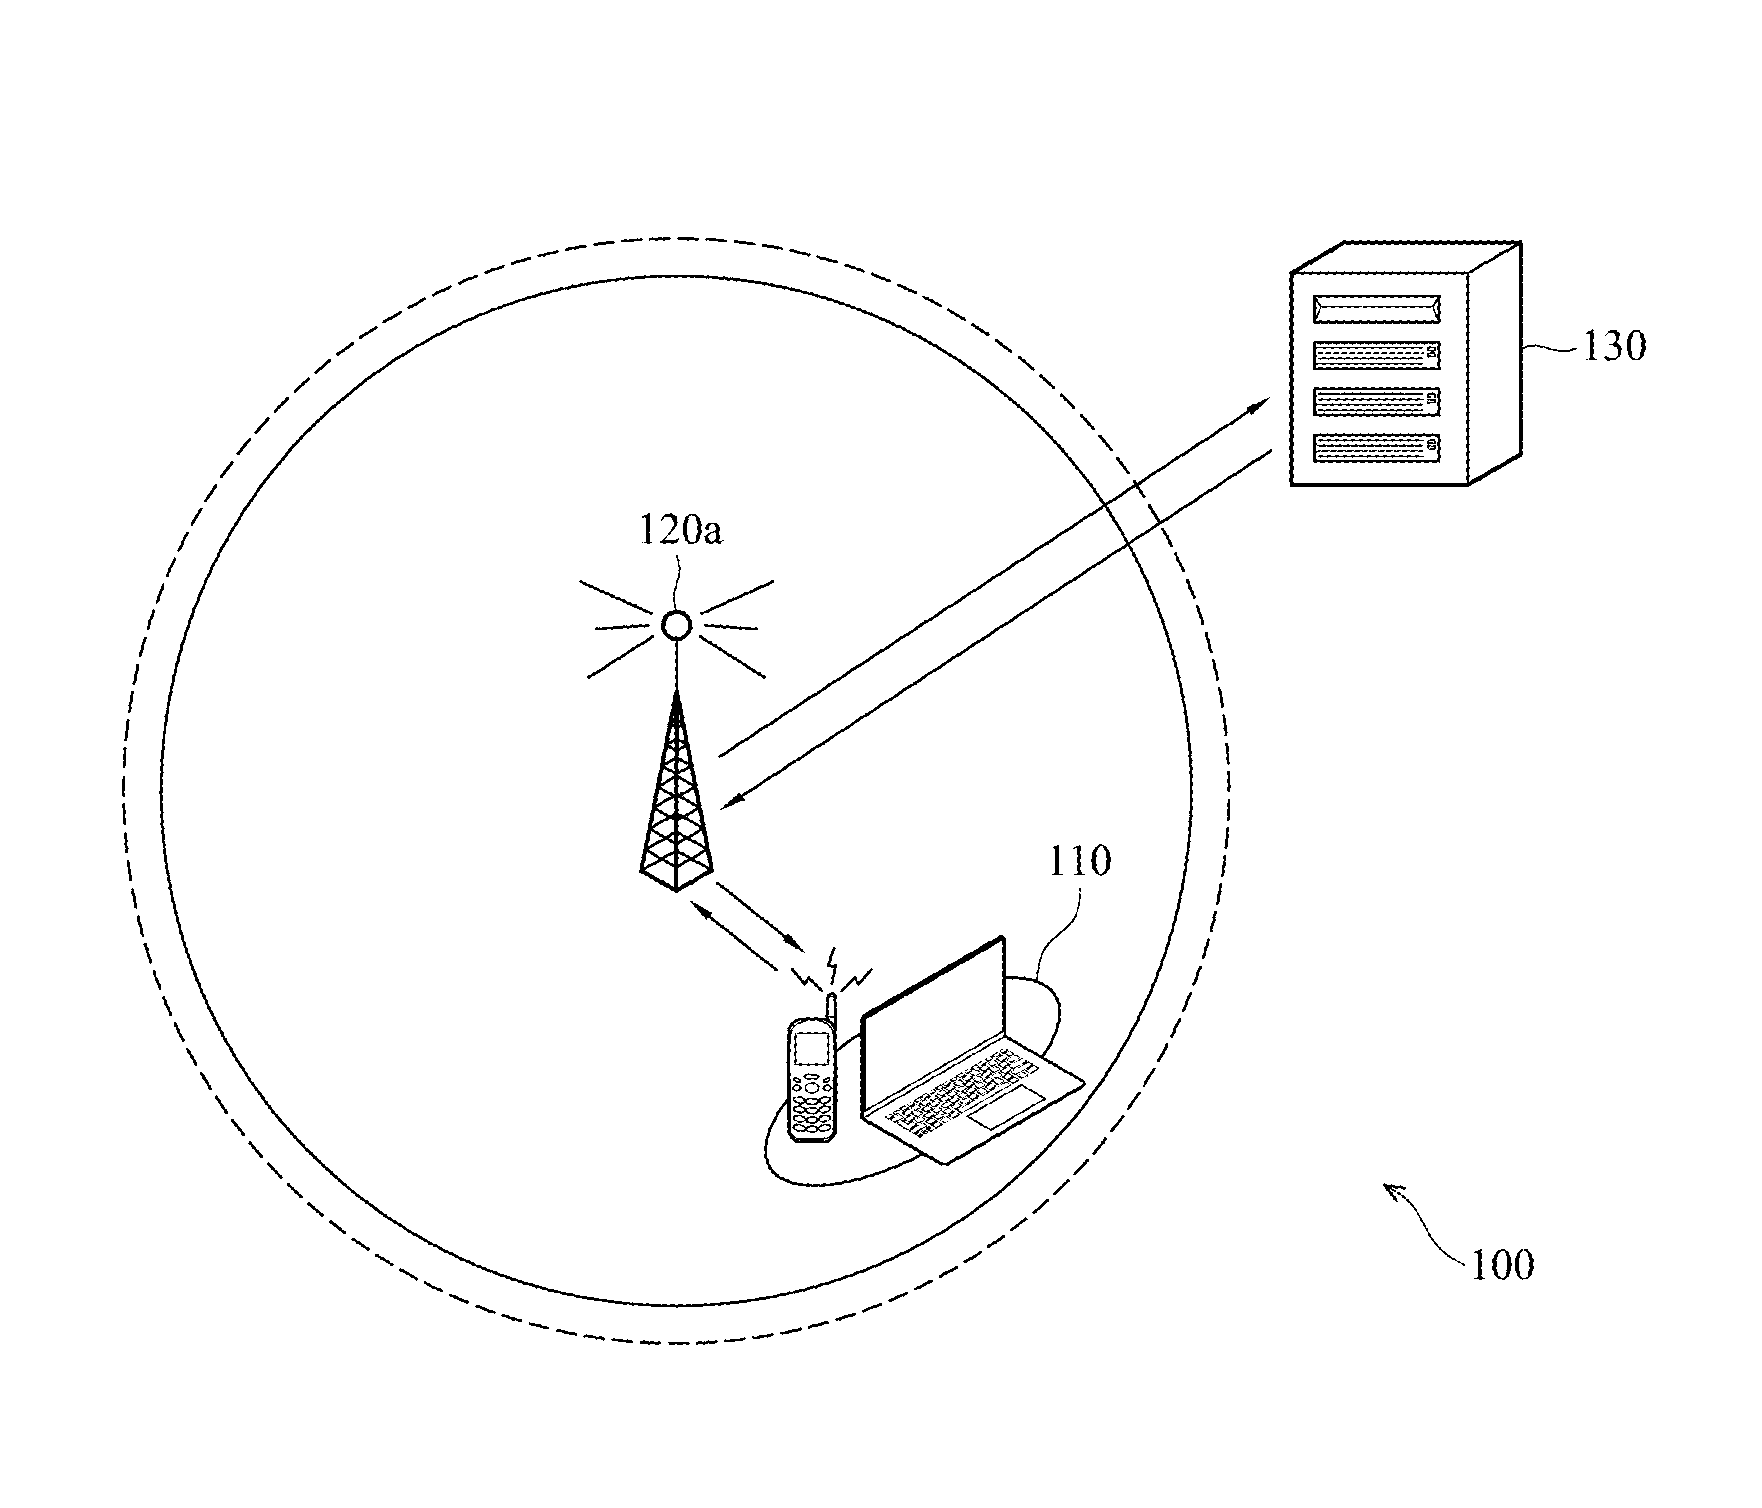 Wireless communication system for improving the handoff of the wireless mobile device according to geographic information and a method for improving handoff